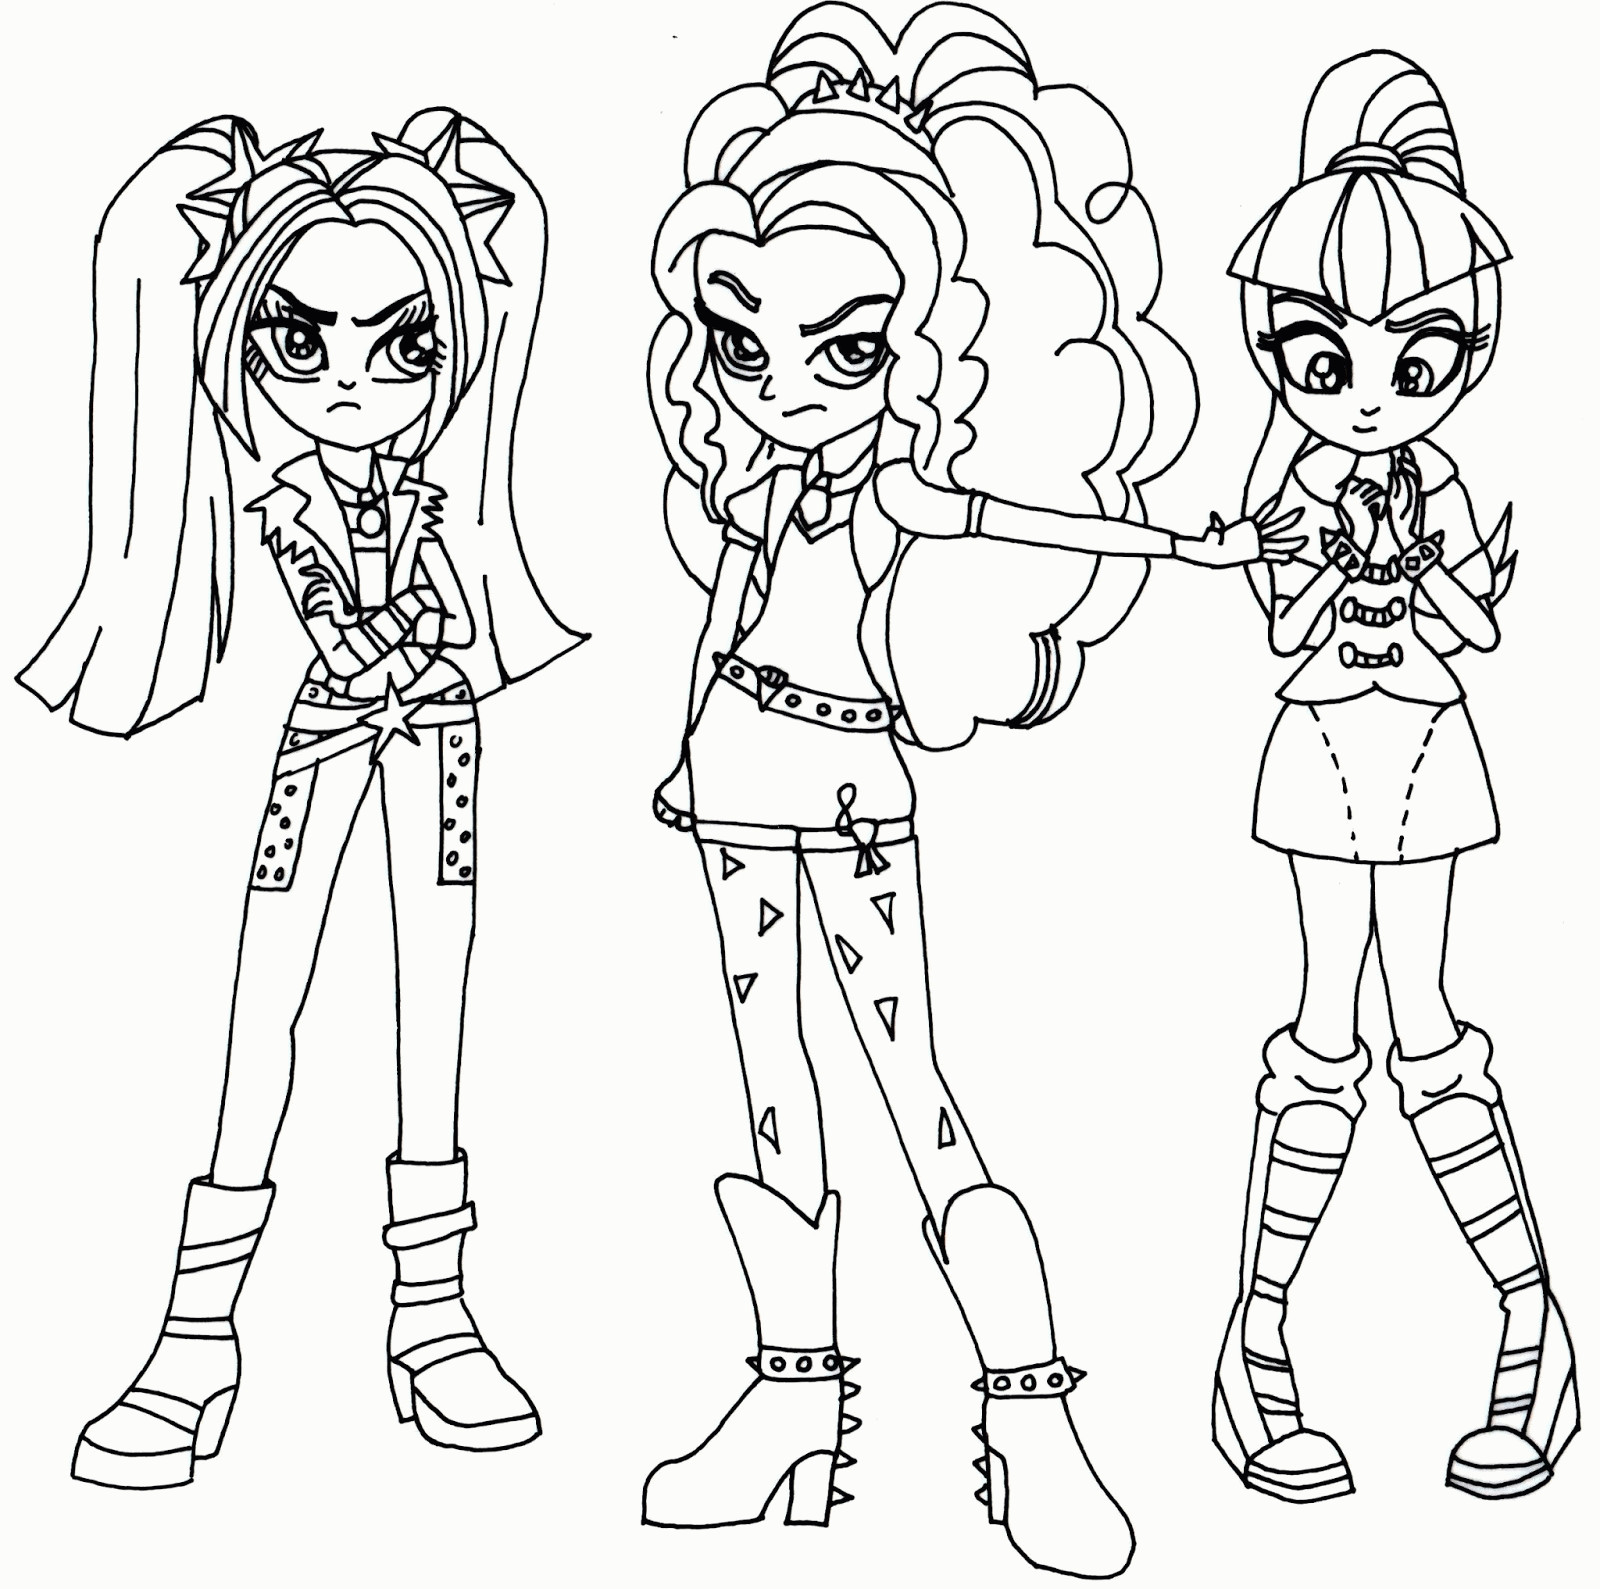 Equestria Girls Coloring Pages
 My Little Pony Equestria Girls Coloring Pages Coloring Home